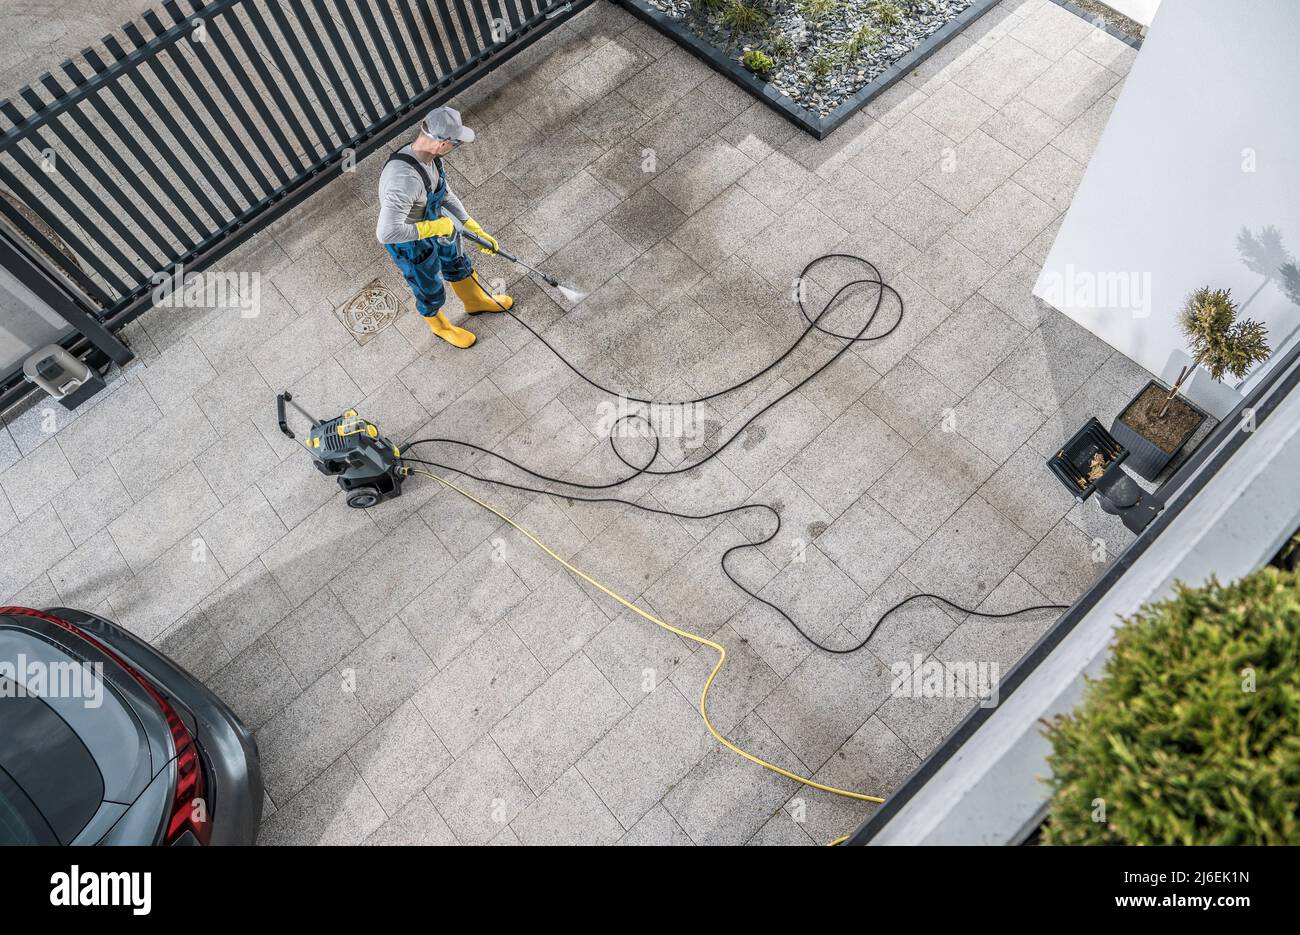 Caucasian Home Owner Pressure Washing His Dirty Driveway Aerial Photo. Keeping Concrete Driveway Bricks Clean. Stock Photo